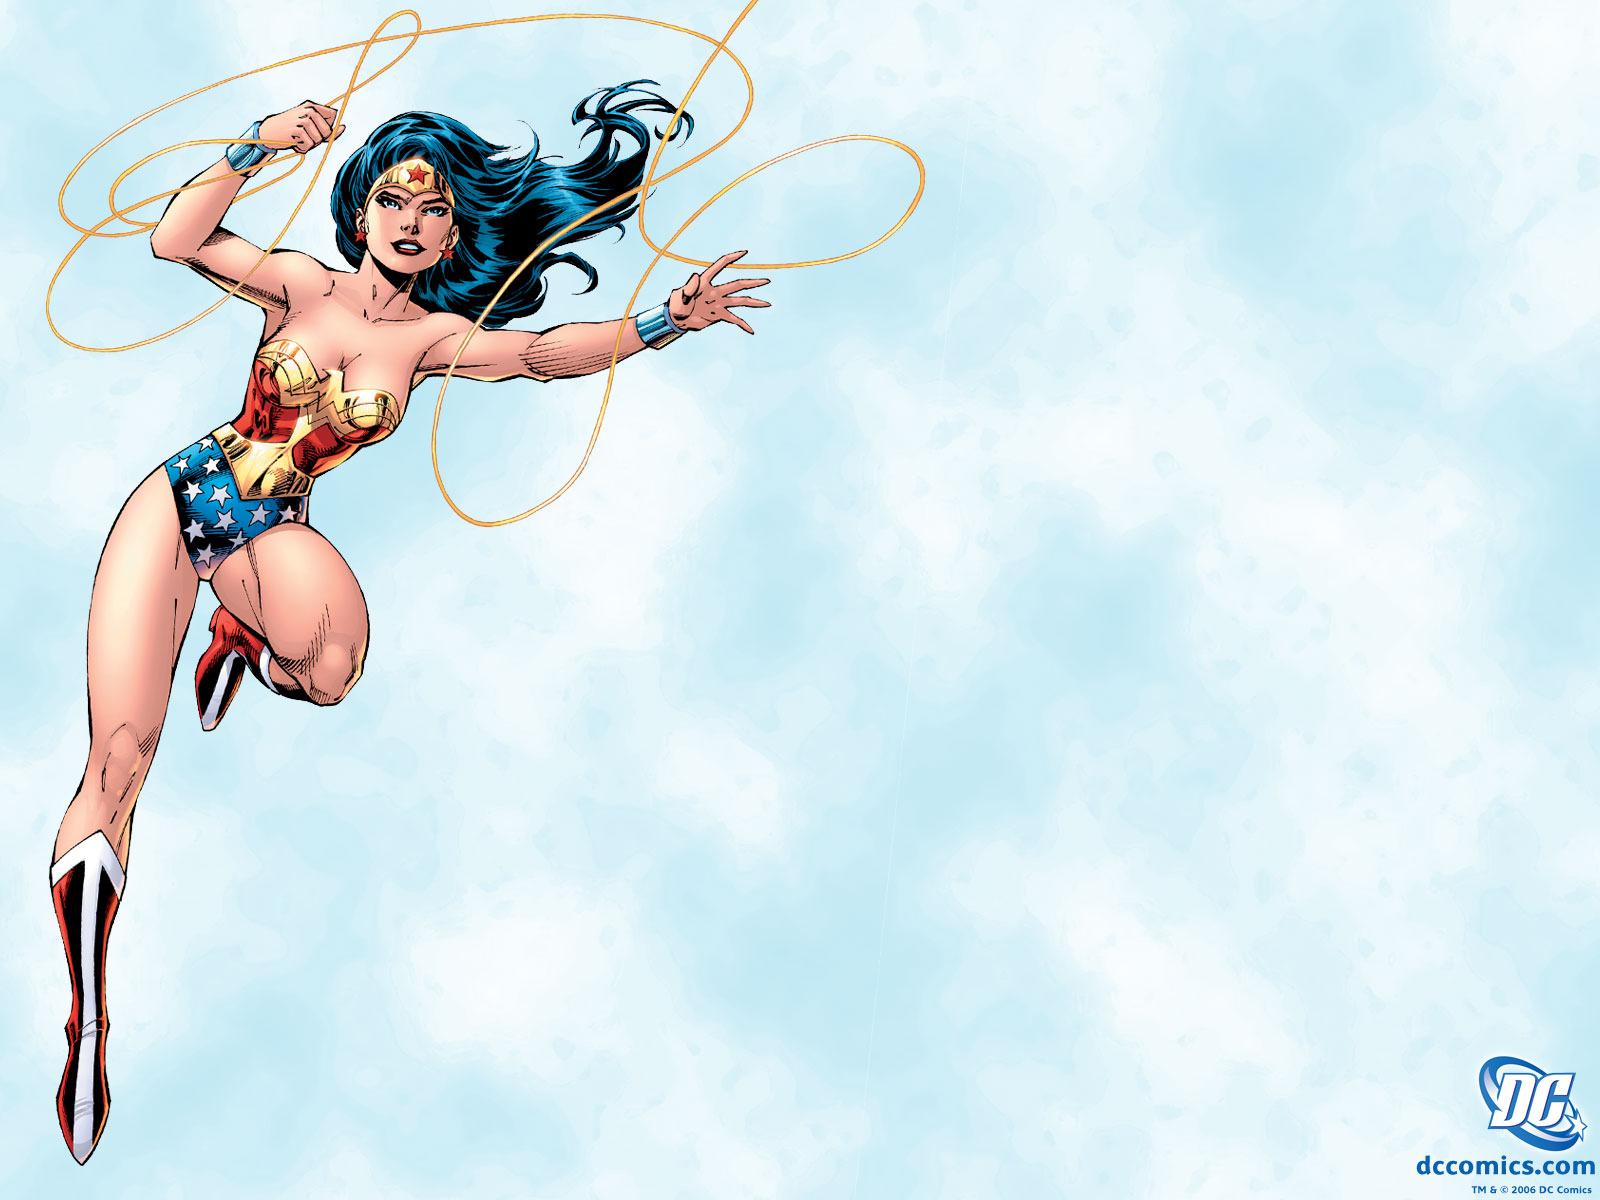 Big List Of Directors Rumored For The Wonder Woman Movie